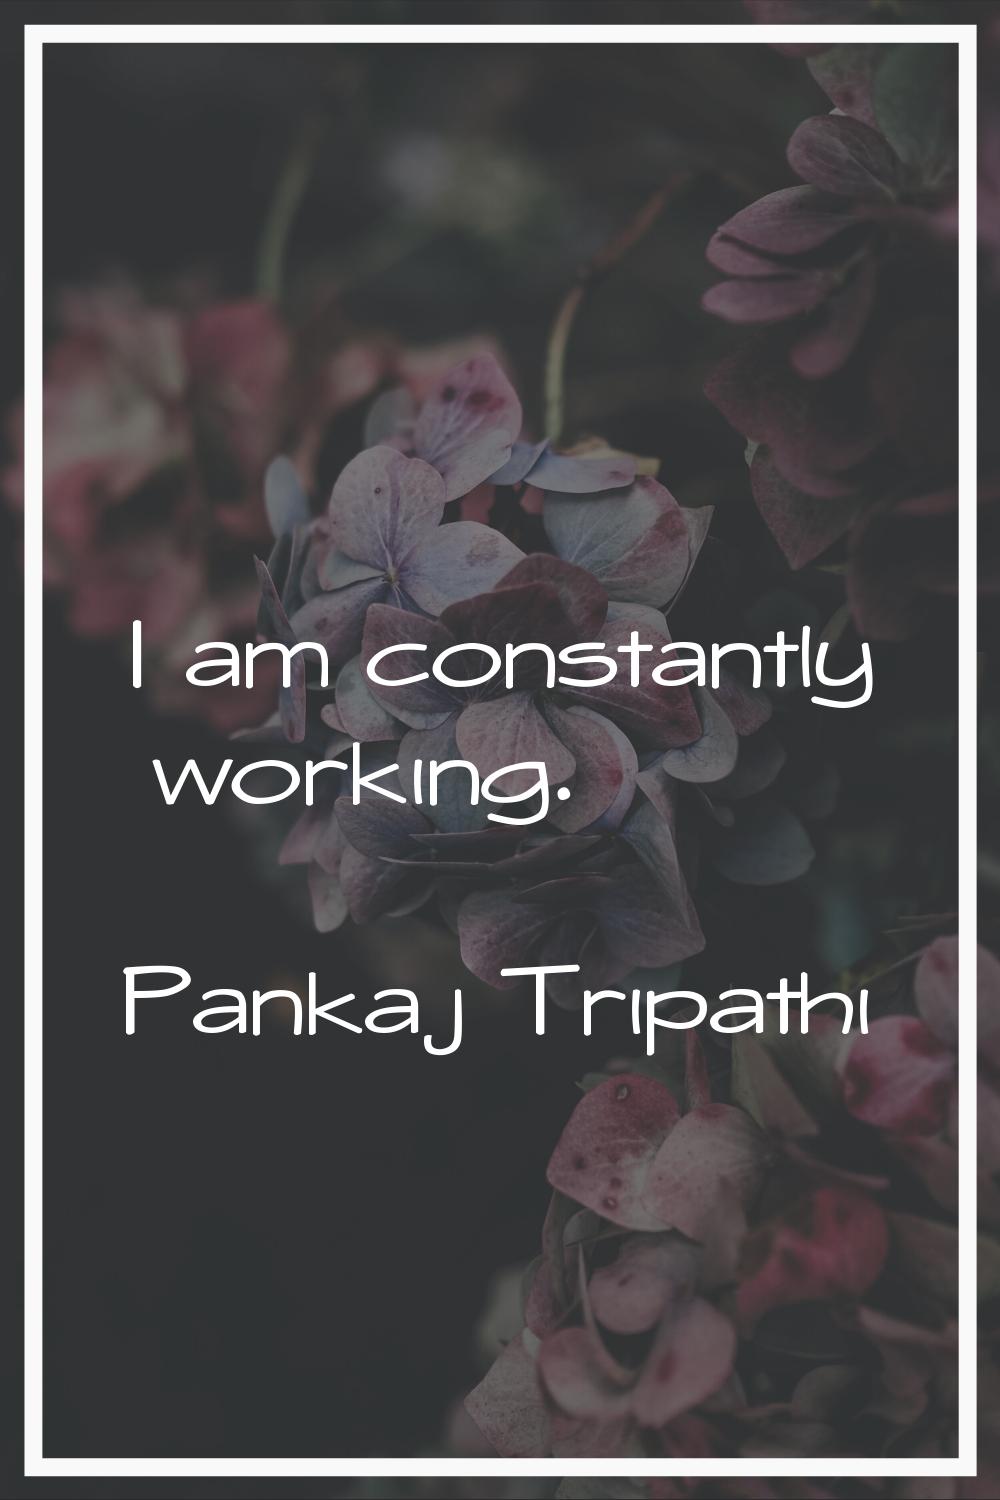 I am constantly working.